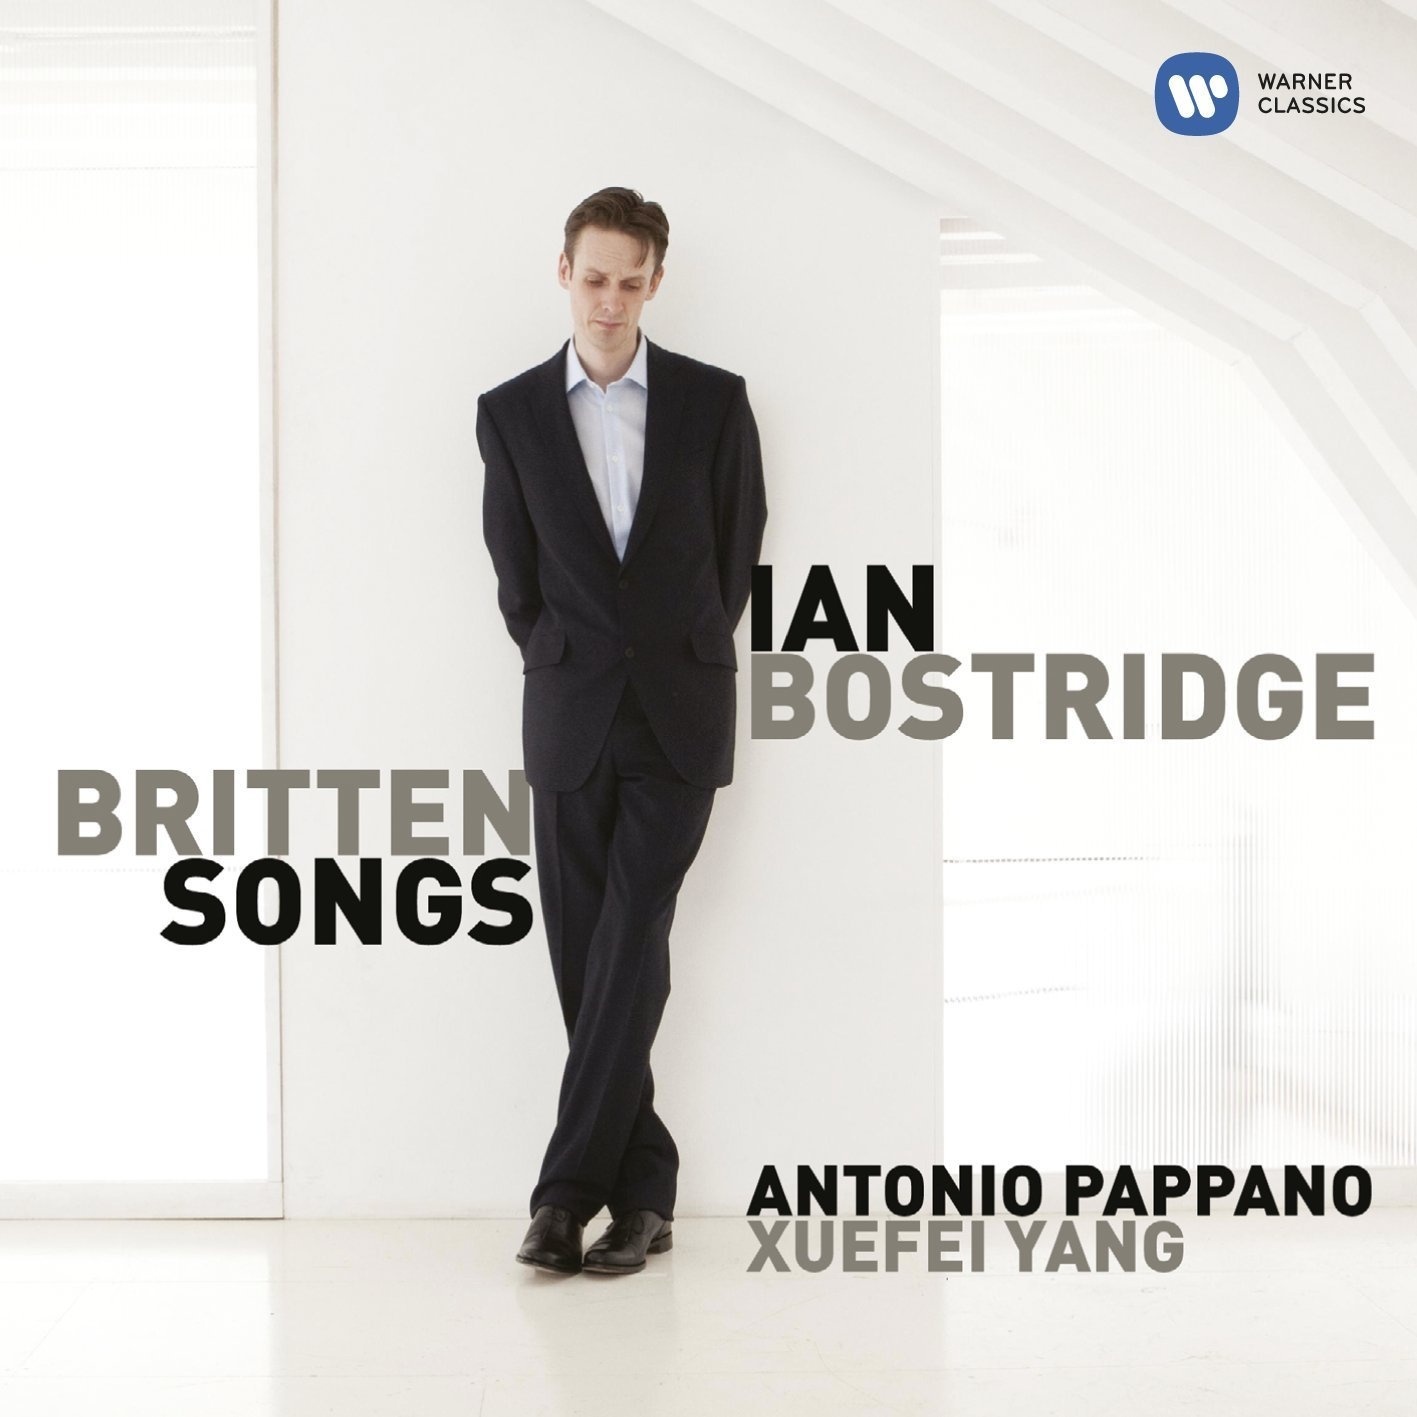 Benjamin Britten: Songs from the Chinese Op. 58  Depression words: Po Chü i